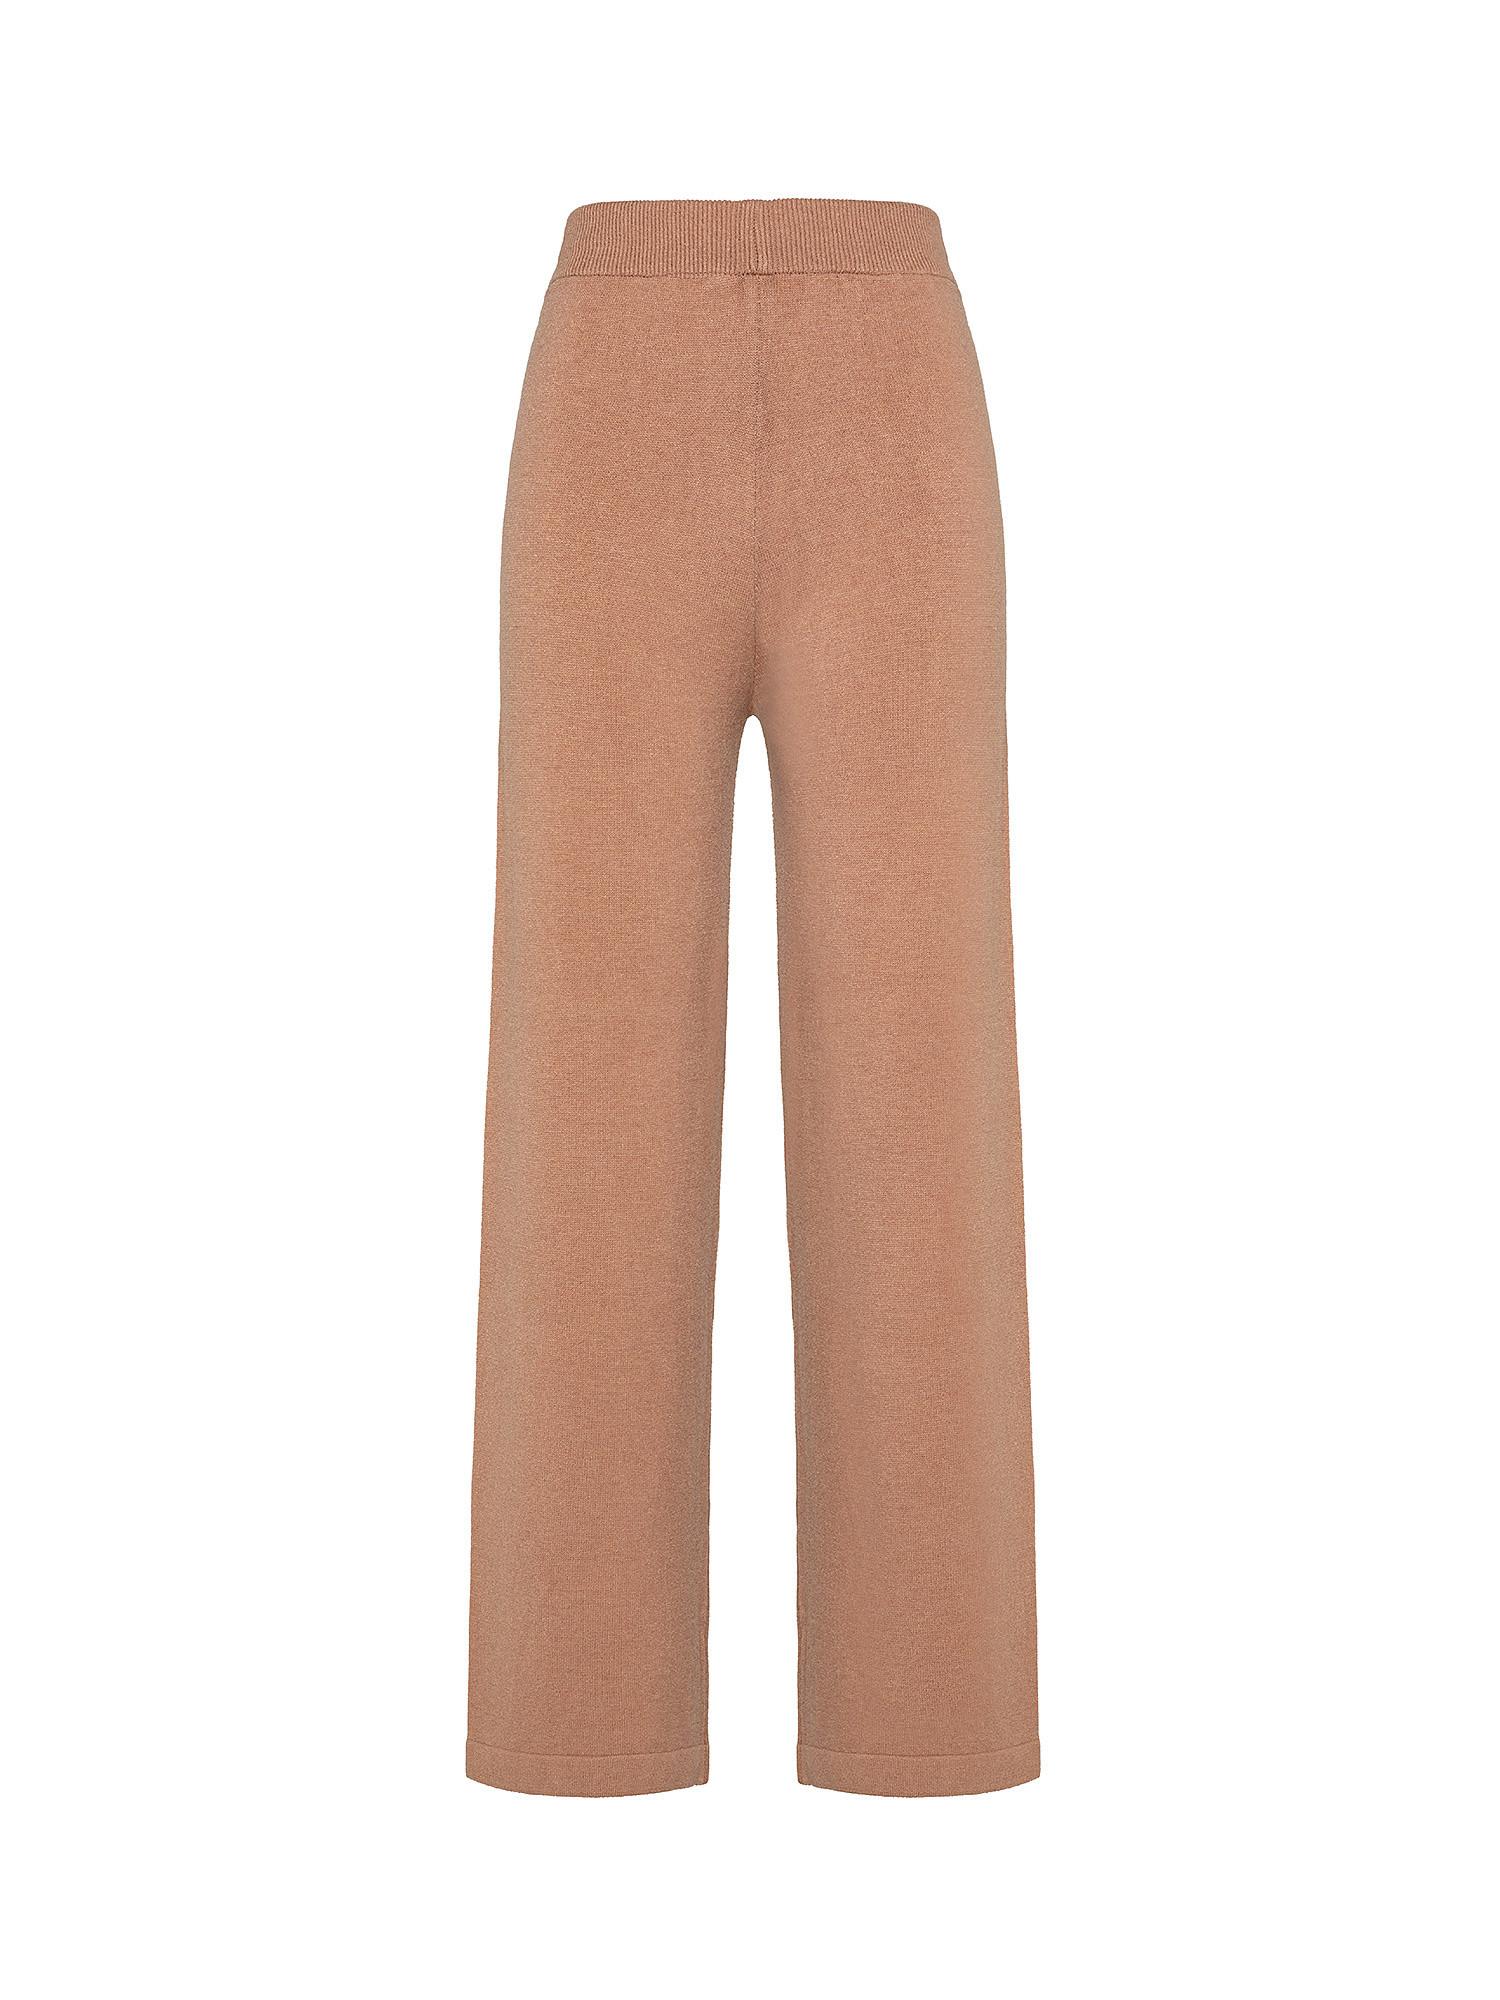 Wide leg knitted trousers, Camel, large image number 0